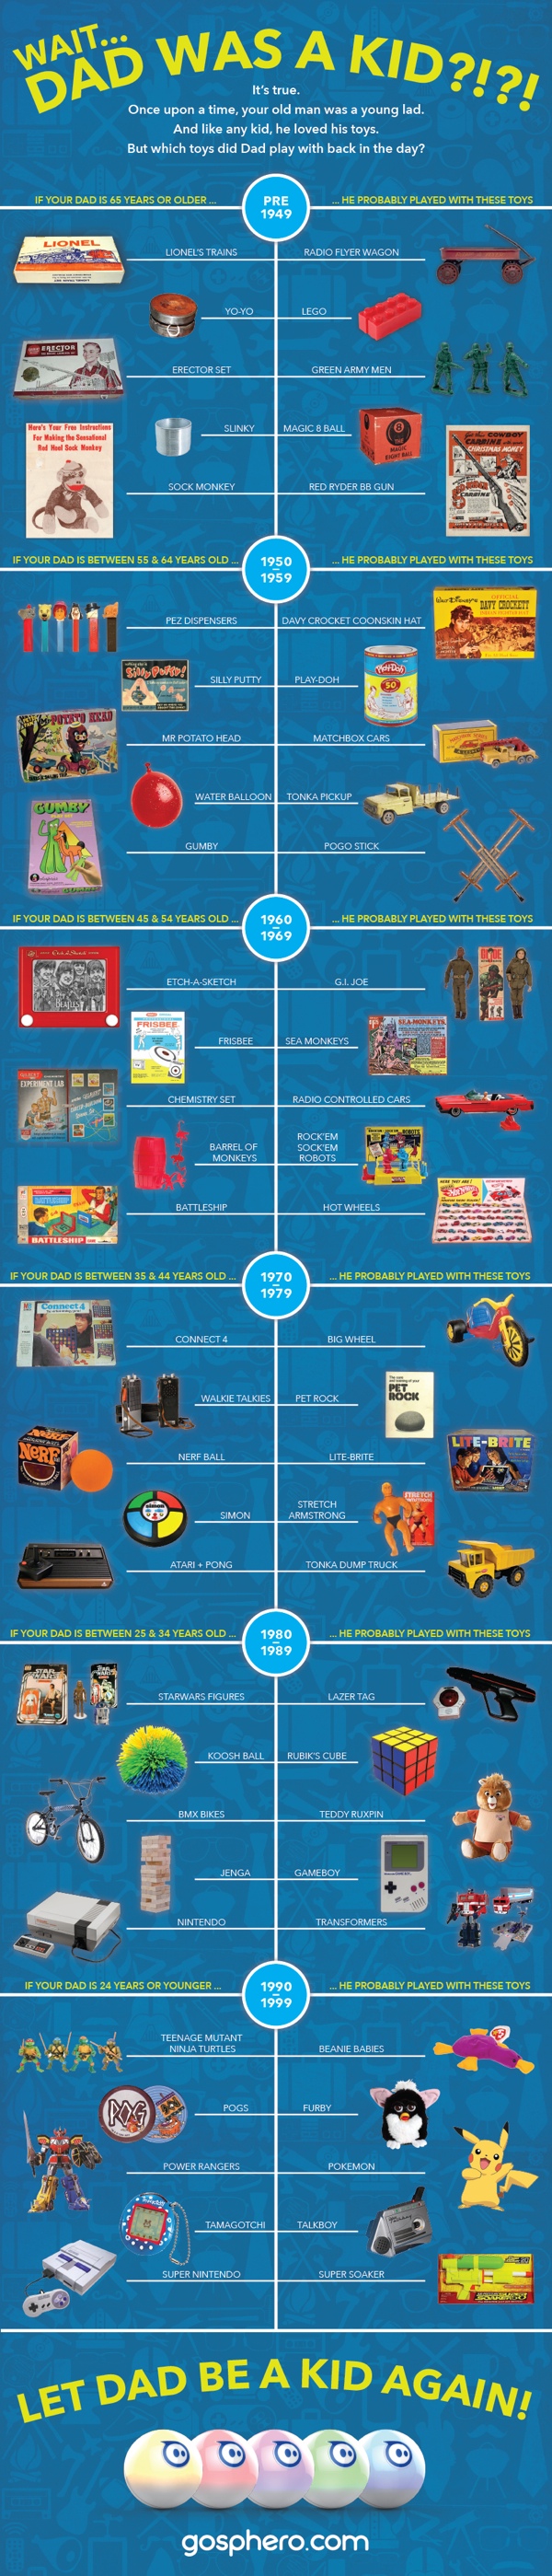 Let Dad Be A Kid Again! infographic